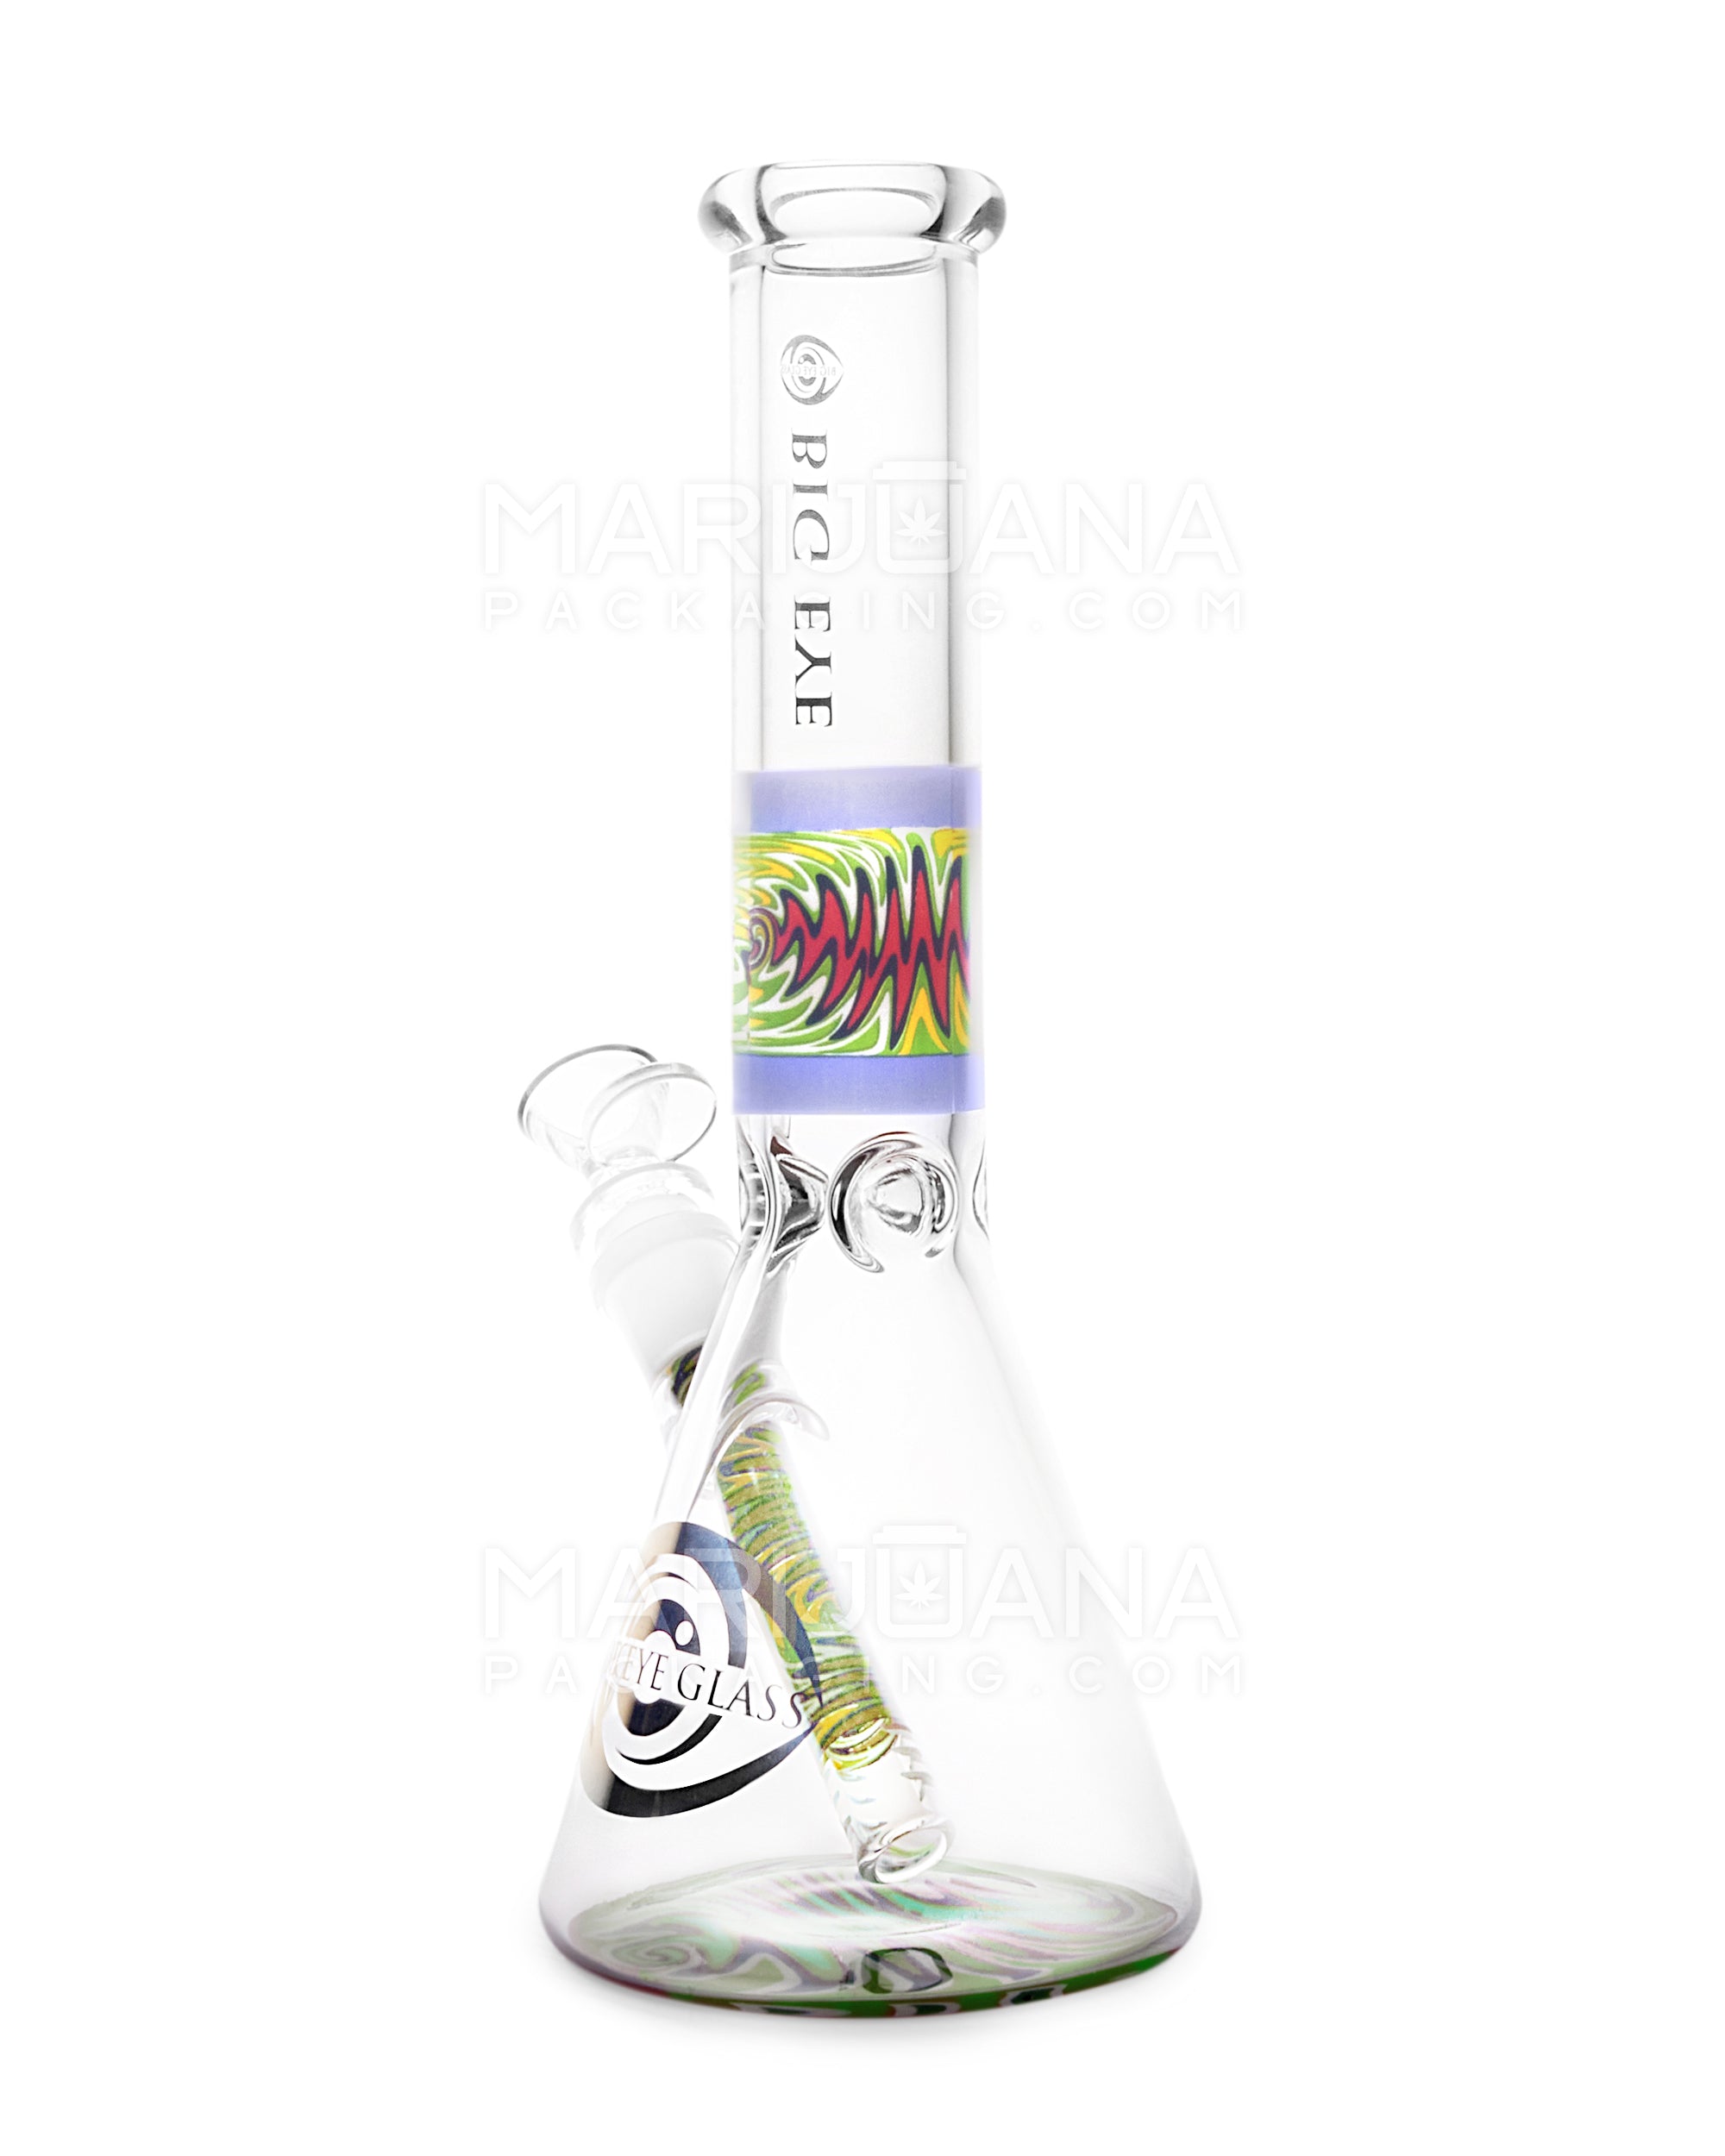 Straight Neck Wig Wag Big Eye Glass Water Pipe w/ Ice Catcher | 10.5in Tall - 14mm Bowl - Assorted